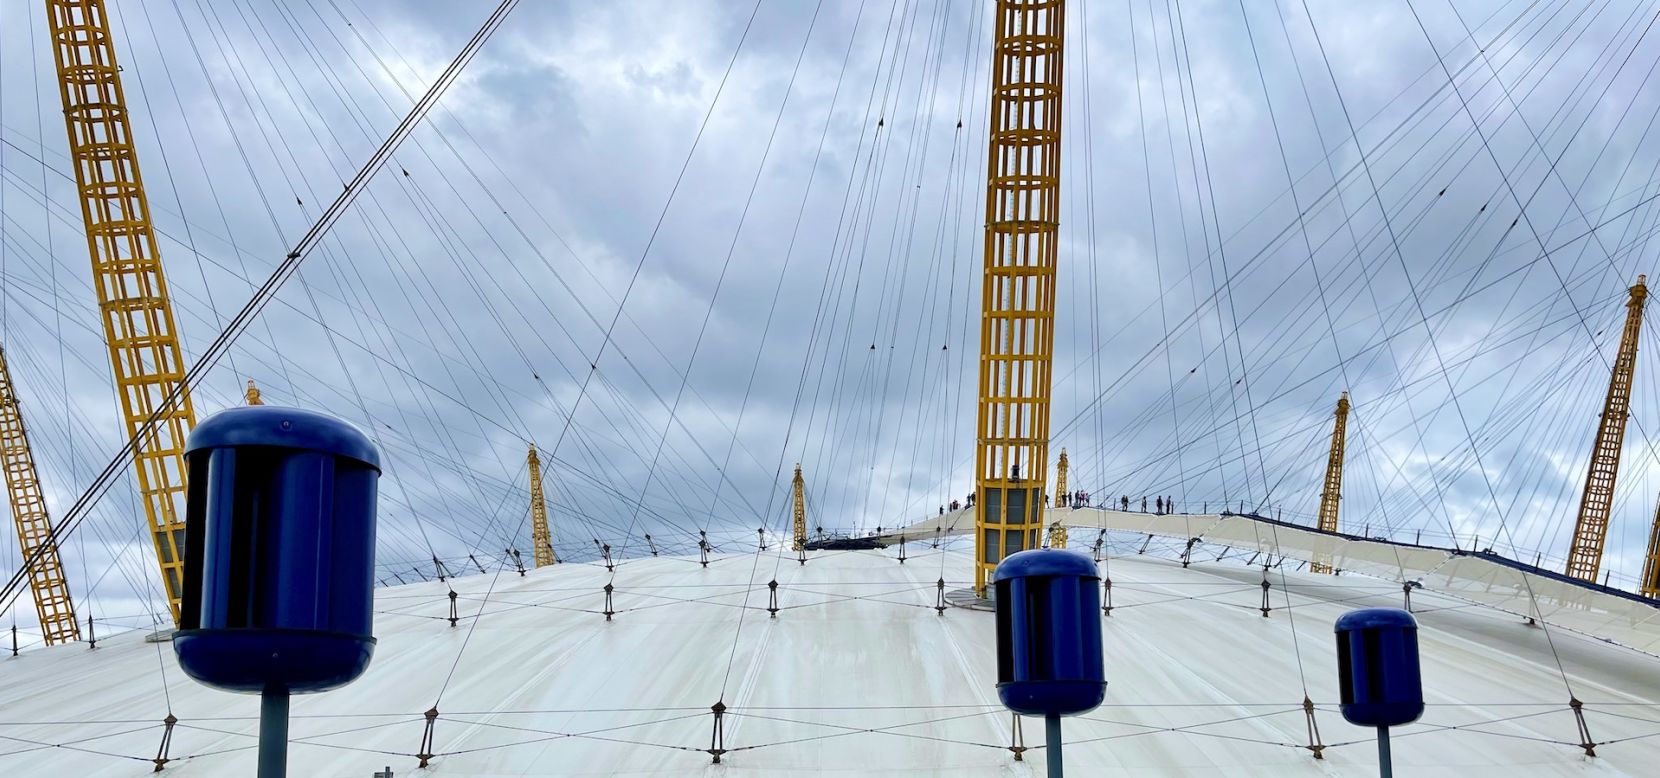 British company Alpha 311 has created small wind turbines capable of generating electricity from the energy created by passing cars. Here, an older version of the design is shown installed on the roof of London's O2 Arena. <strong>Look through the gallery to see more innovative ways of harnessing the power of the wind.</strong>